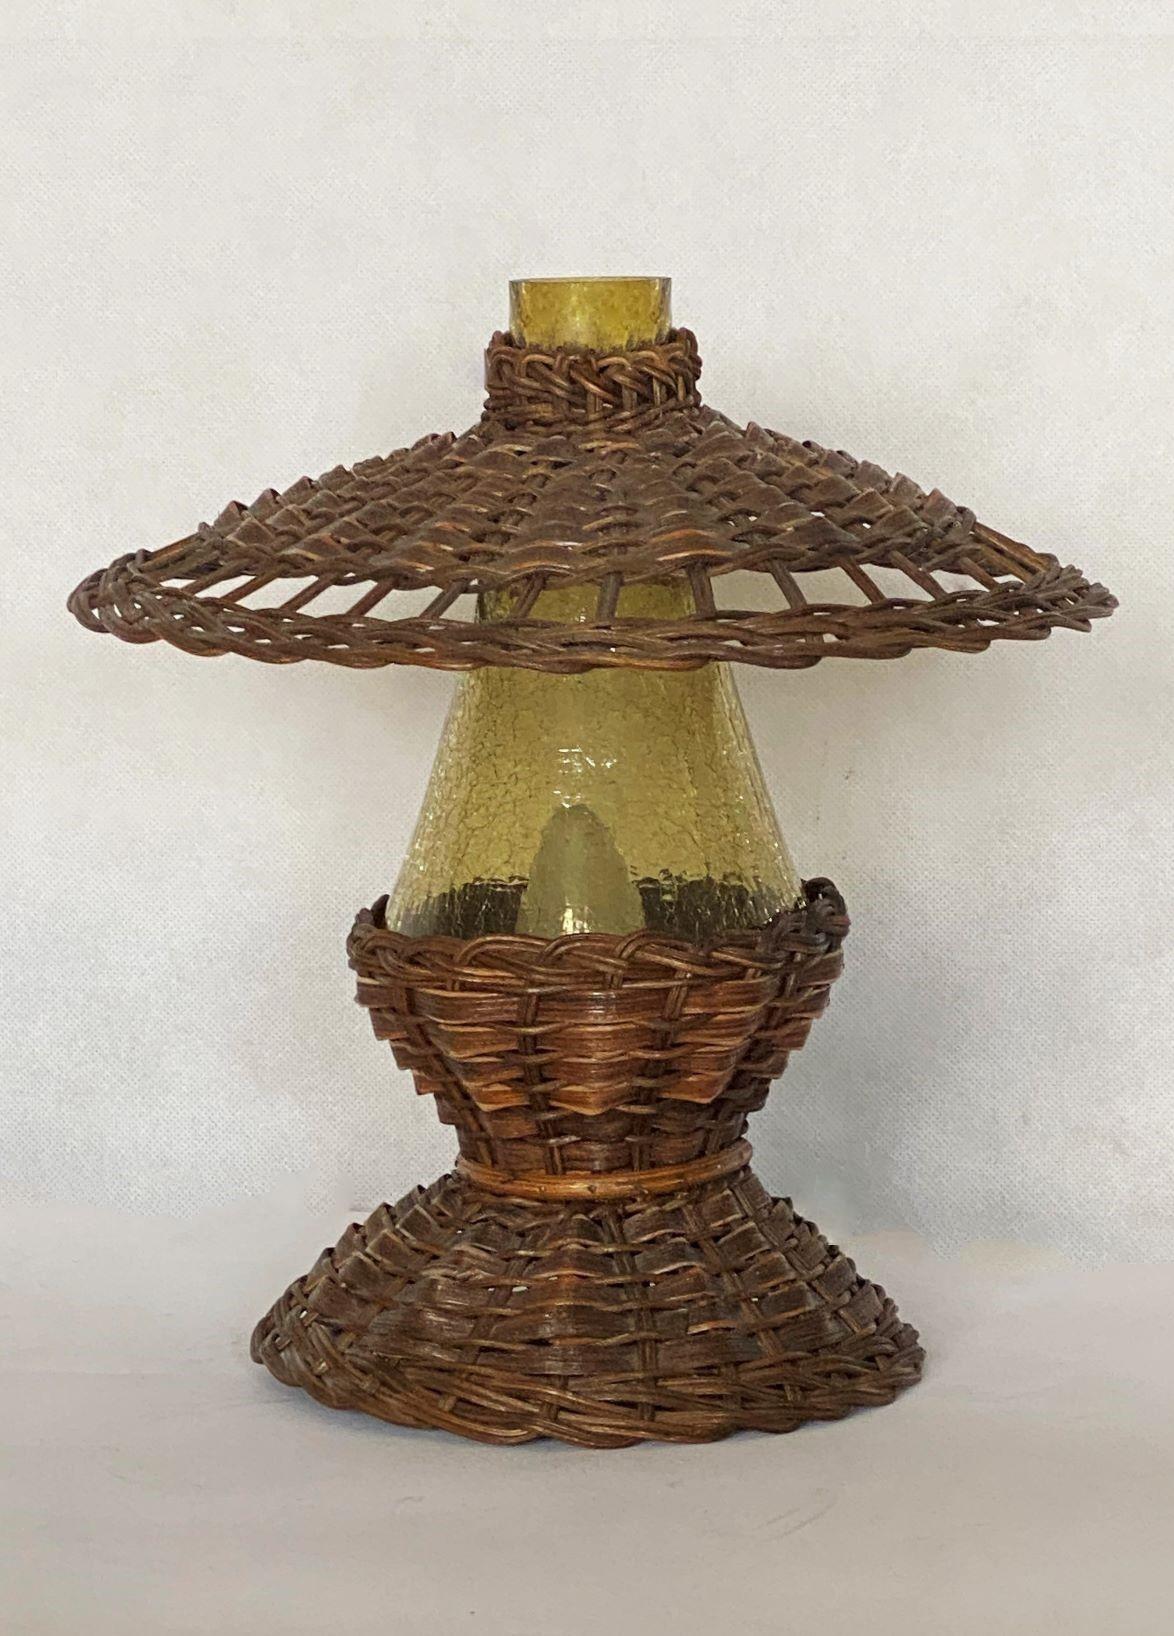 A lovely true Vintage Handcrafted rattan table lamp, Denmark, 1960s, with a colored hurricane glass shade. It takes one Edison E14/E12 screw bulb. This beautiful lamp is in fine vintage condition, no damages, rewired.
Measures: Diameter 10